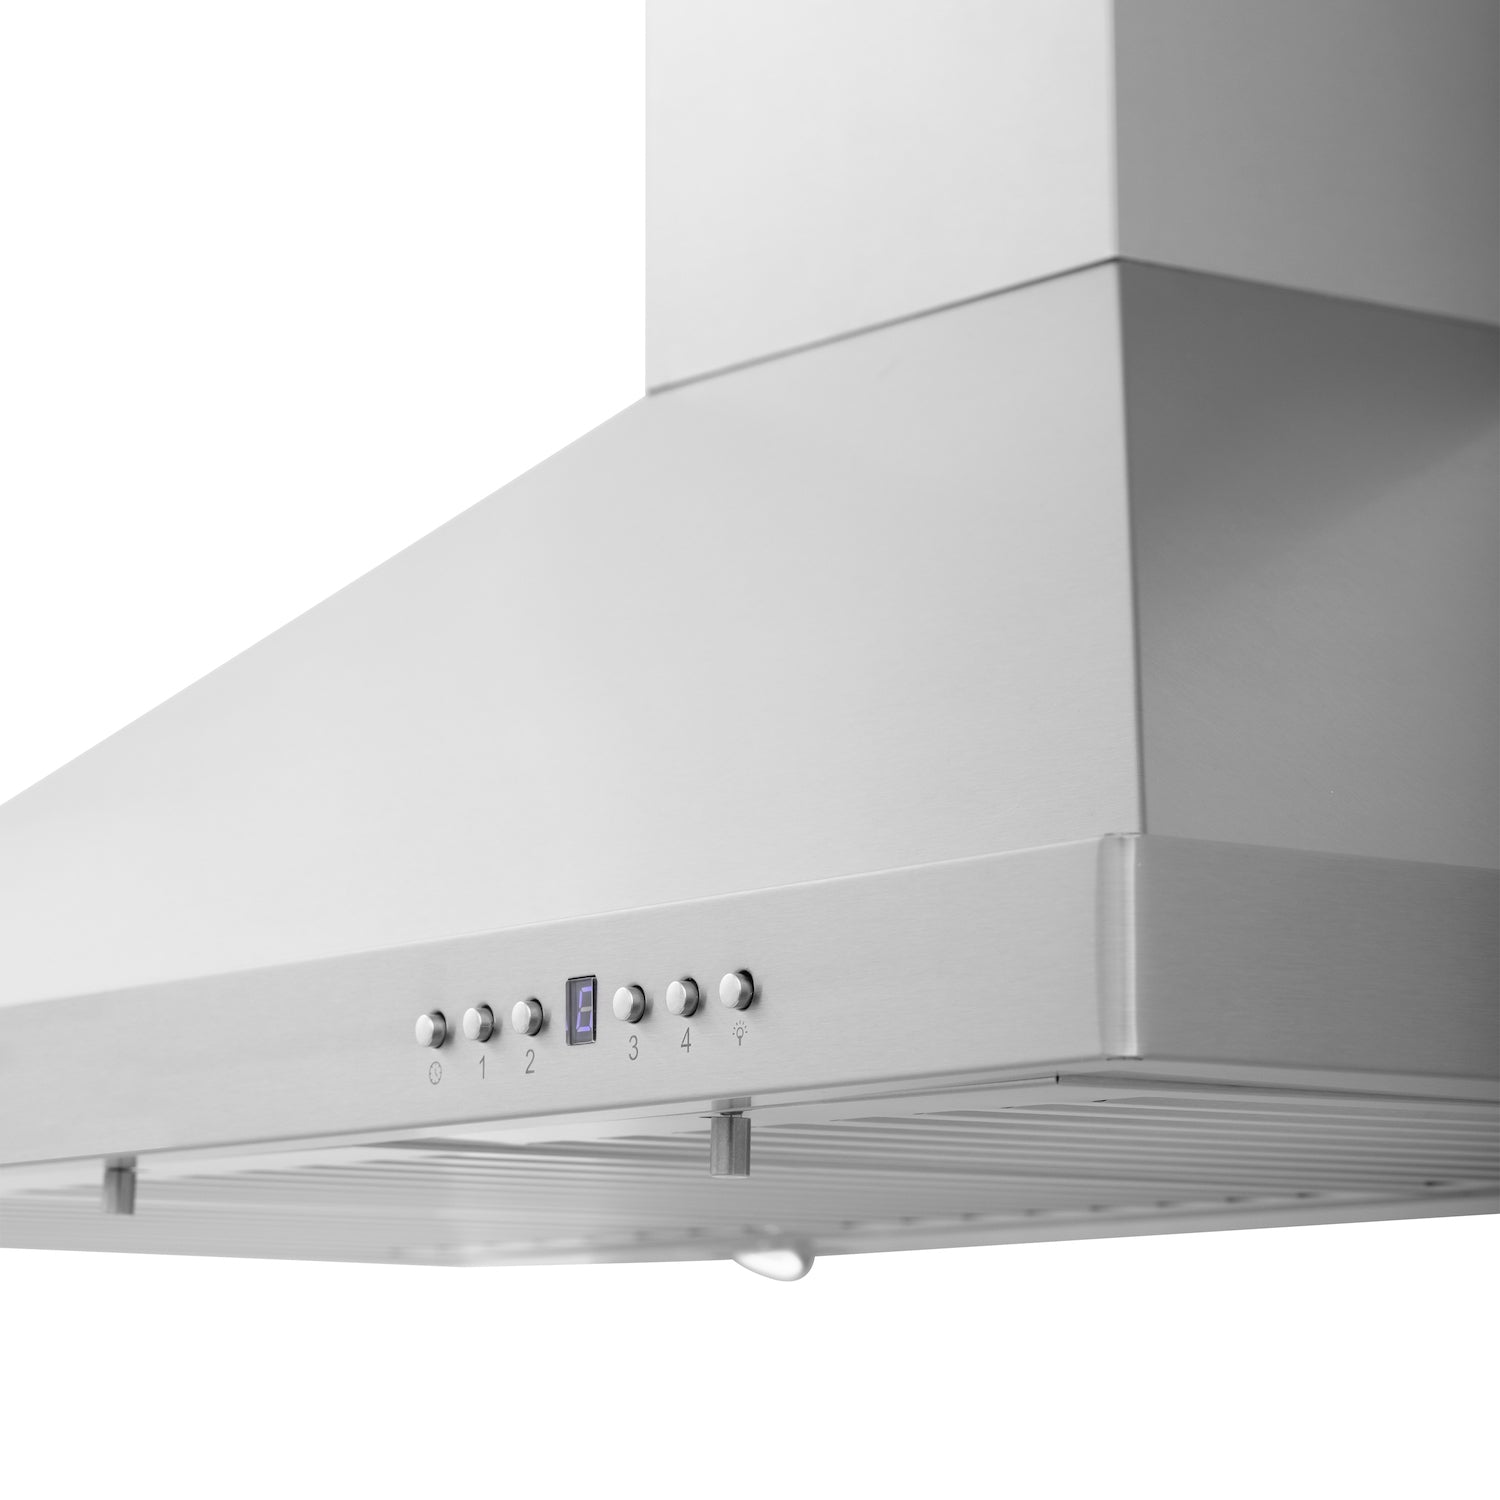 ZLINE 36" Convertible Vent Range Hood buttons, display, and chimney.